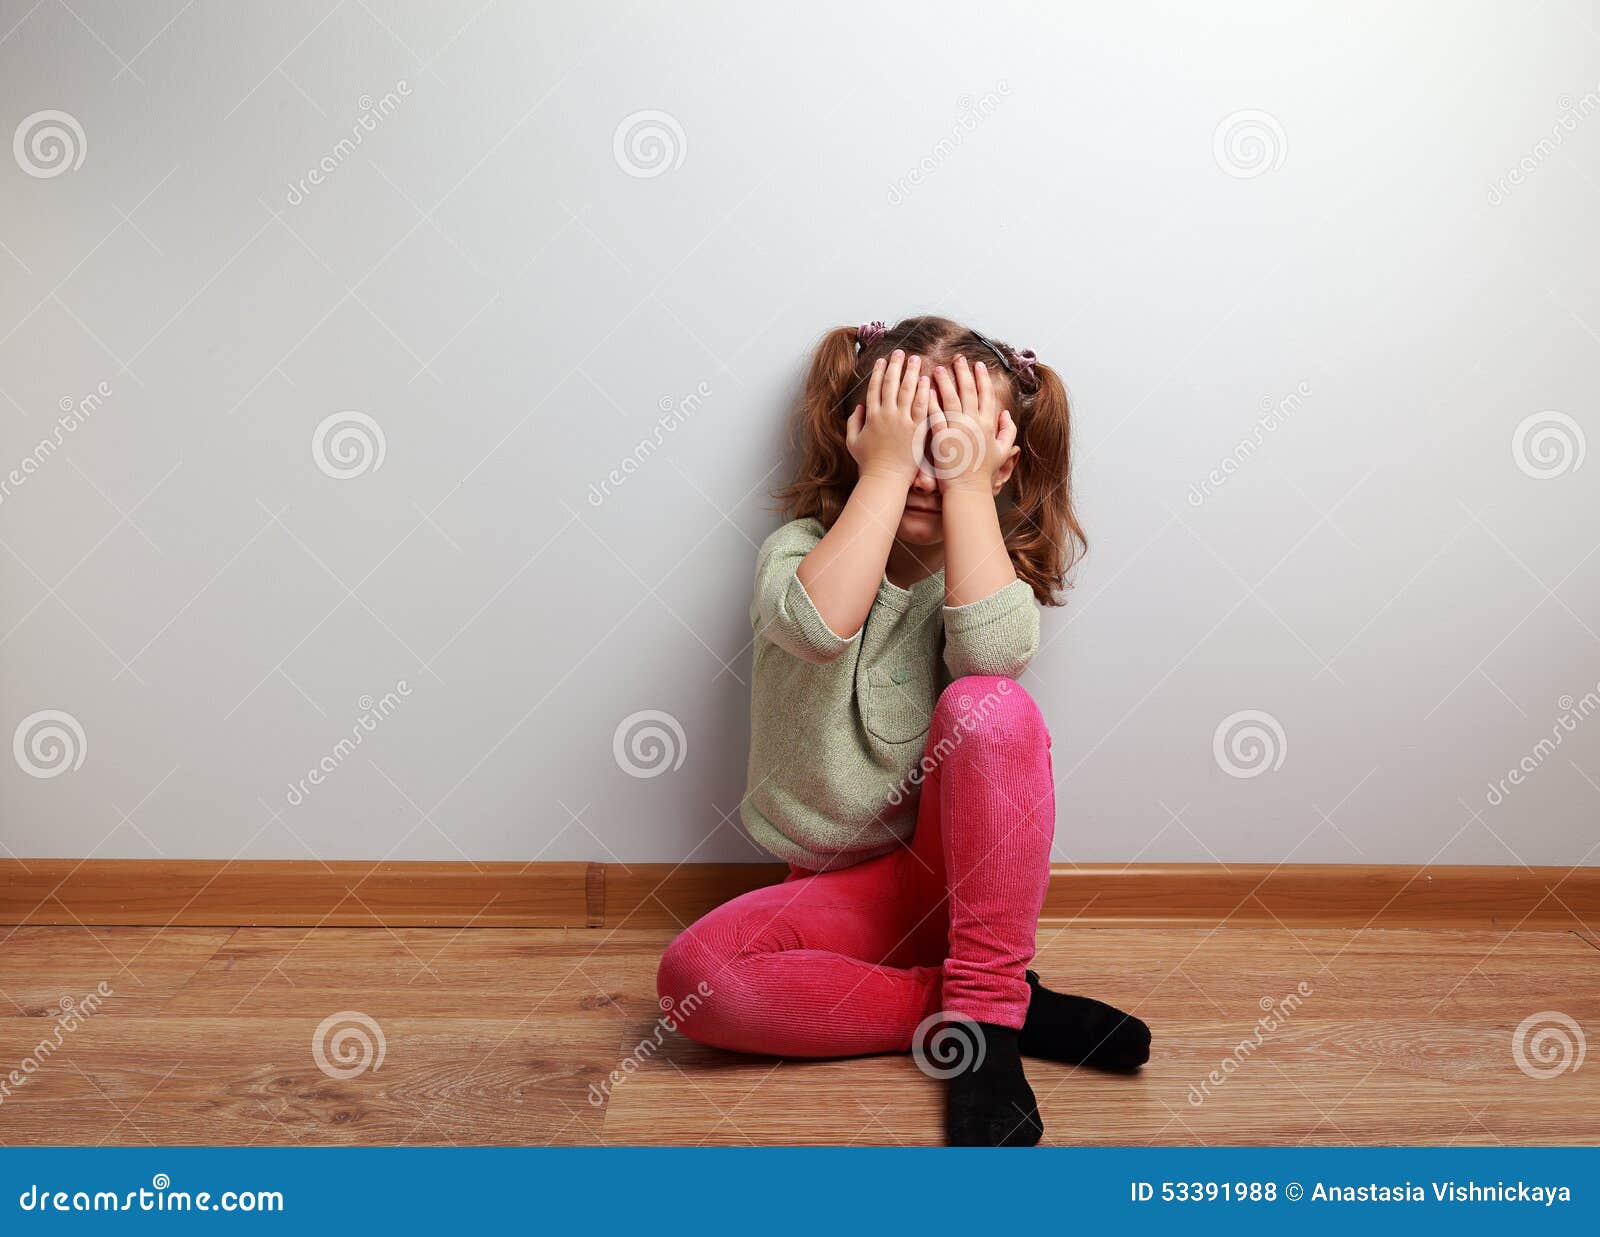 Crying Unhappy Kid Girl Sitting On The Floor With Closed Face Stock Photo Image 53391988